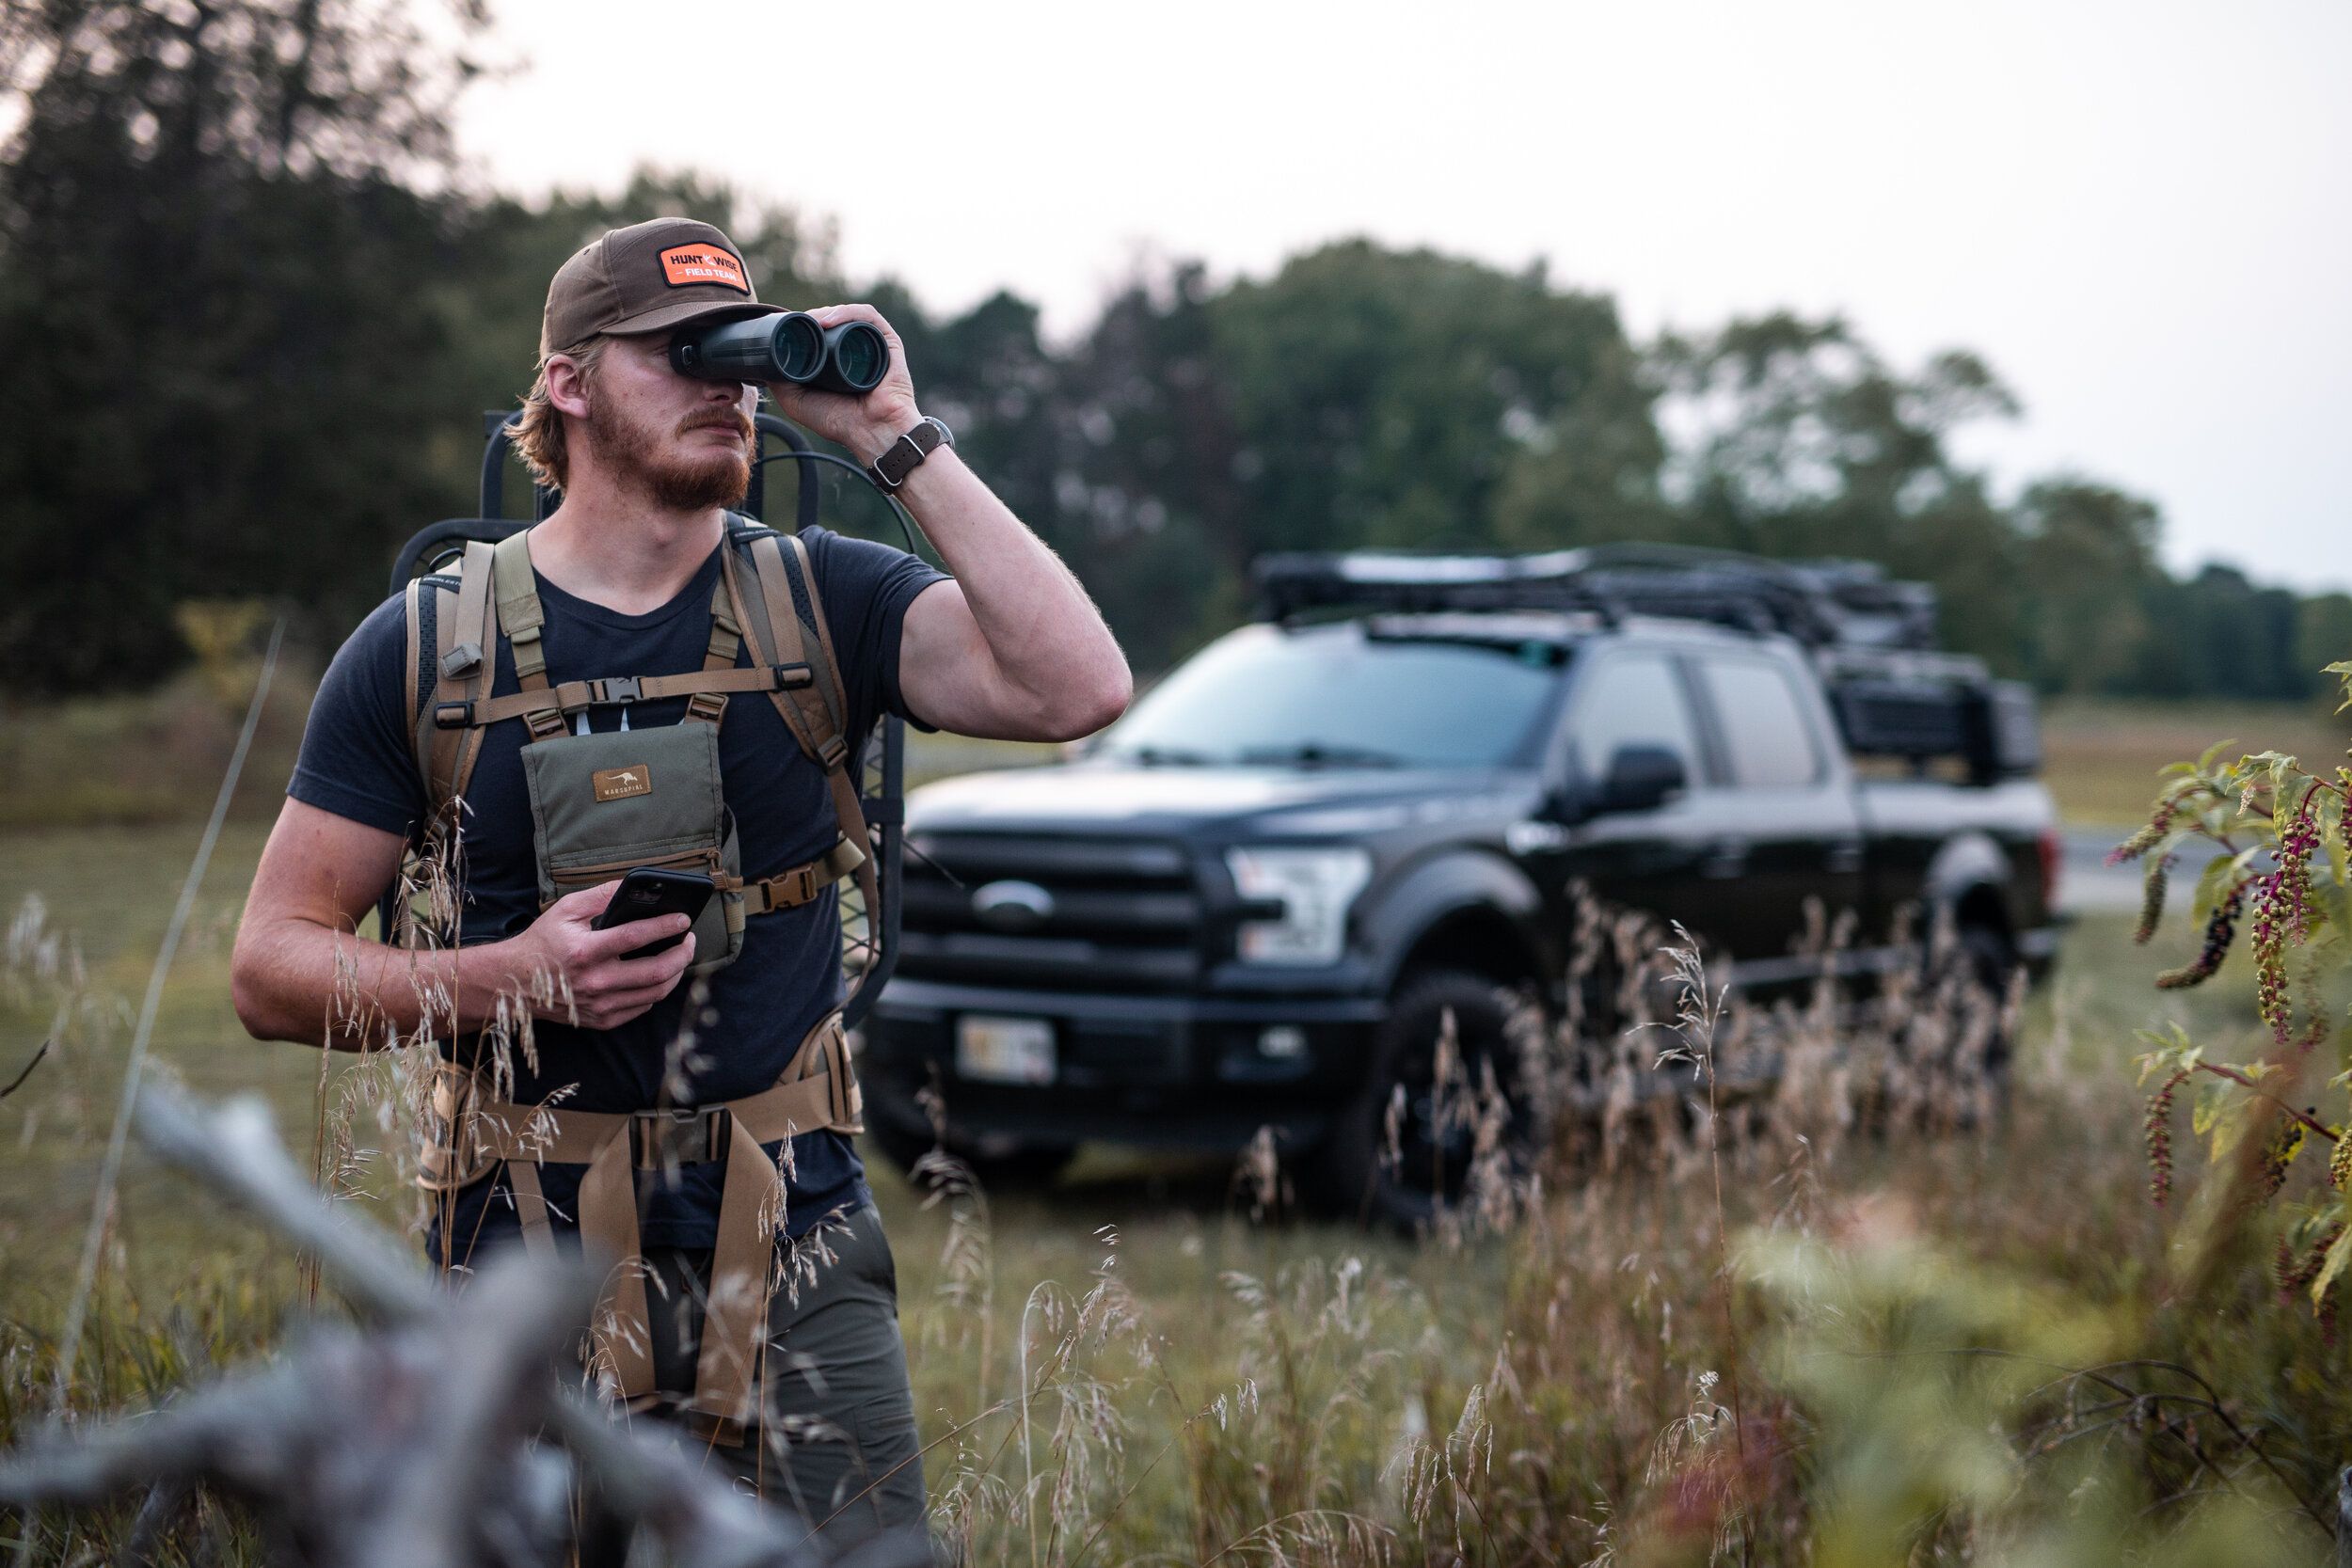 A hunter uses binoculars for scouting public land, whitetail deer hunting concept. 